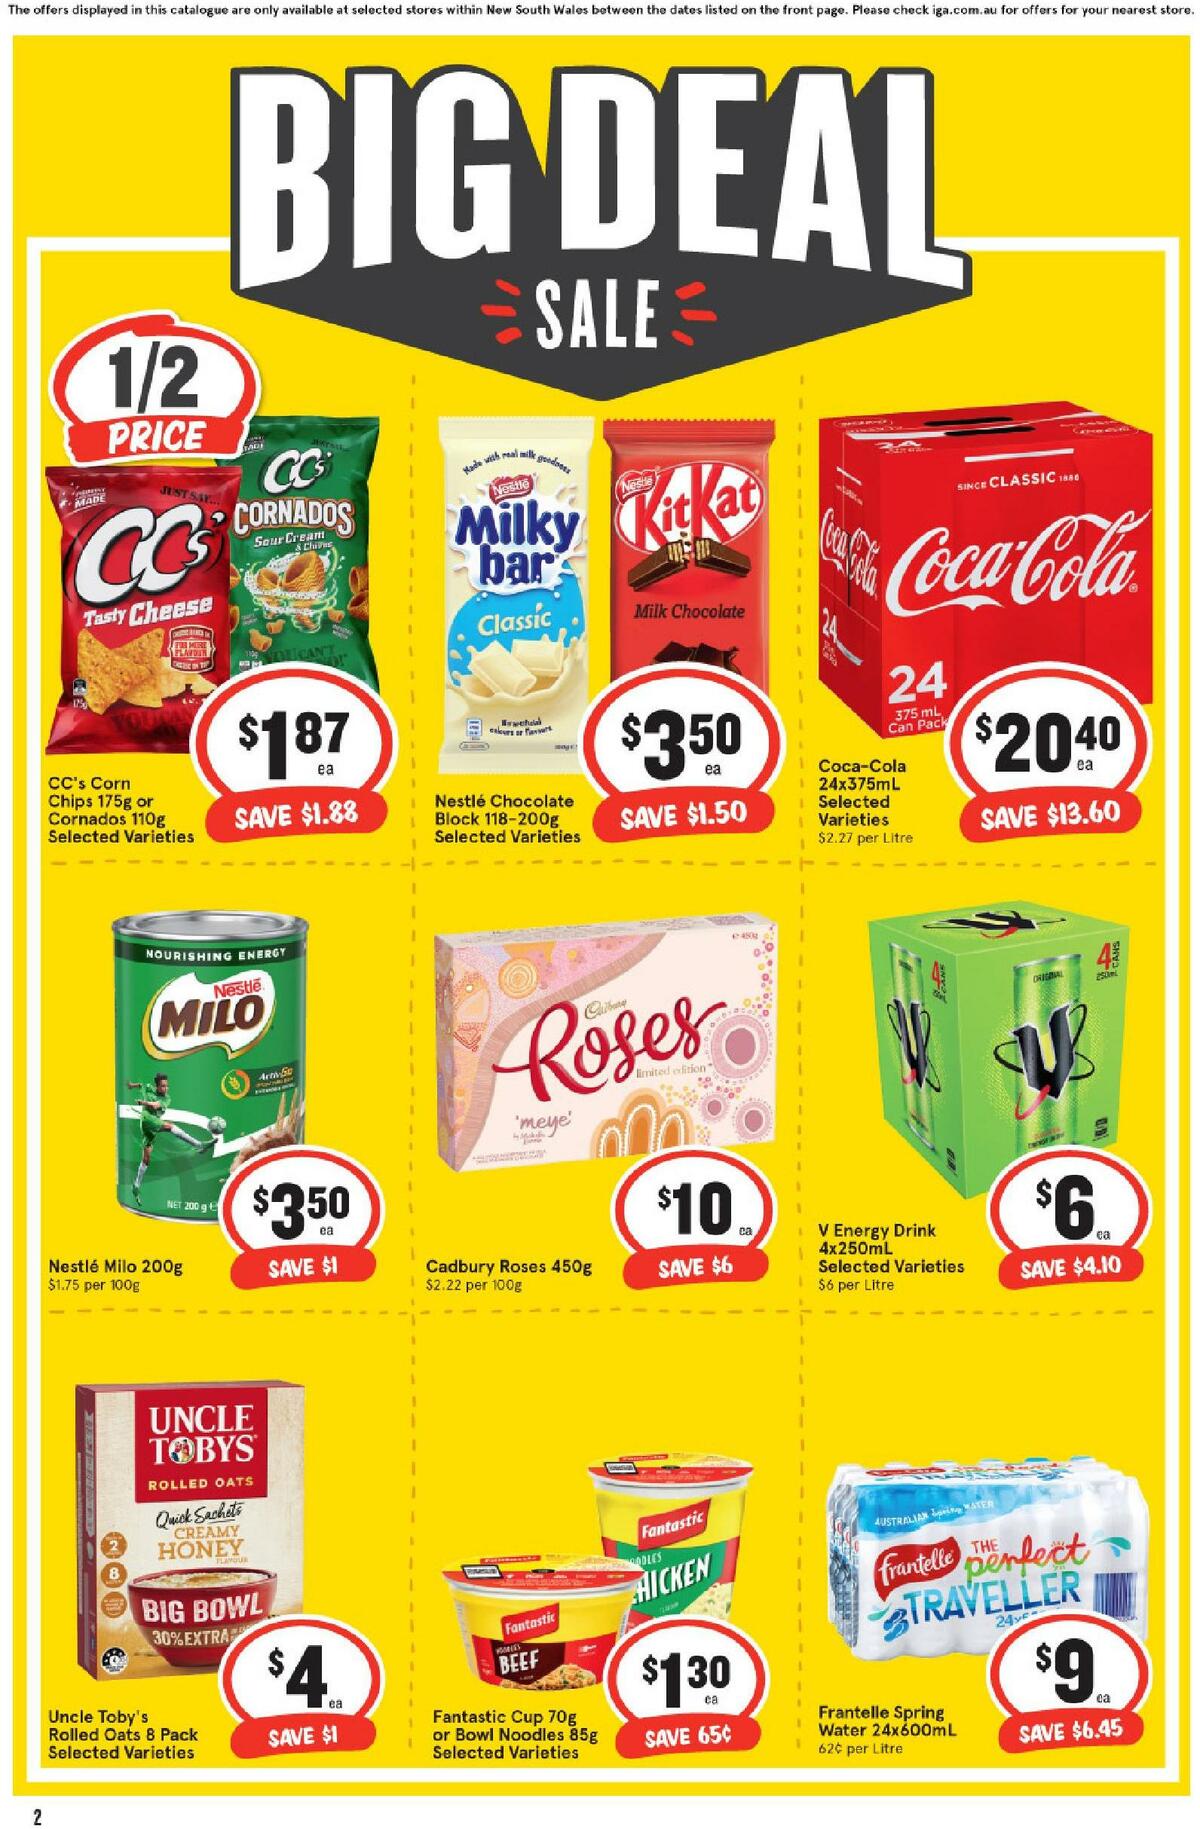 IGA Catalogues from 23 March